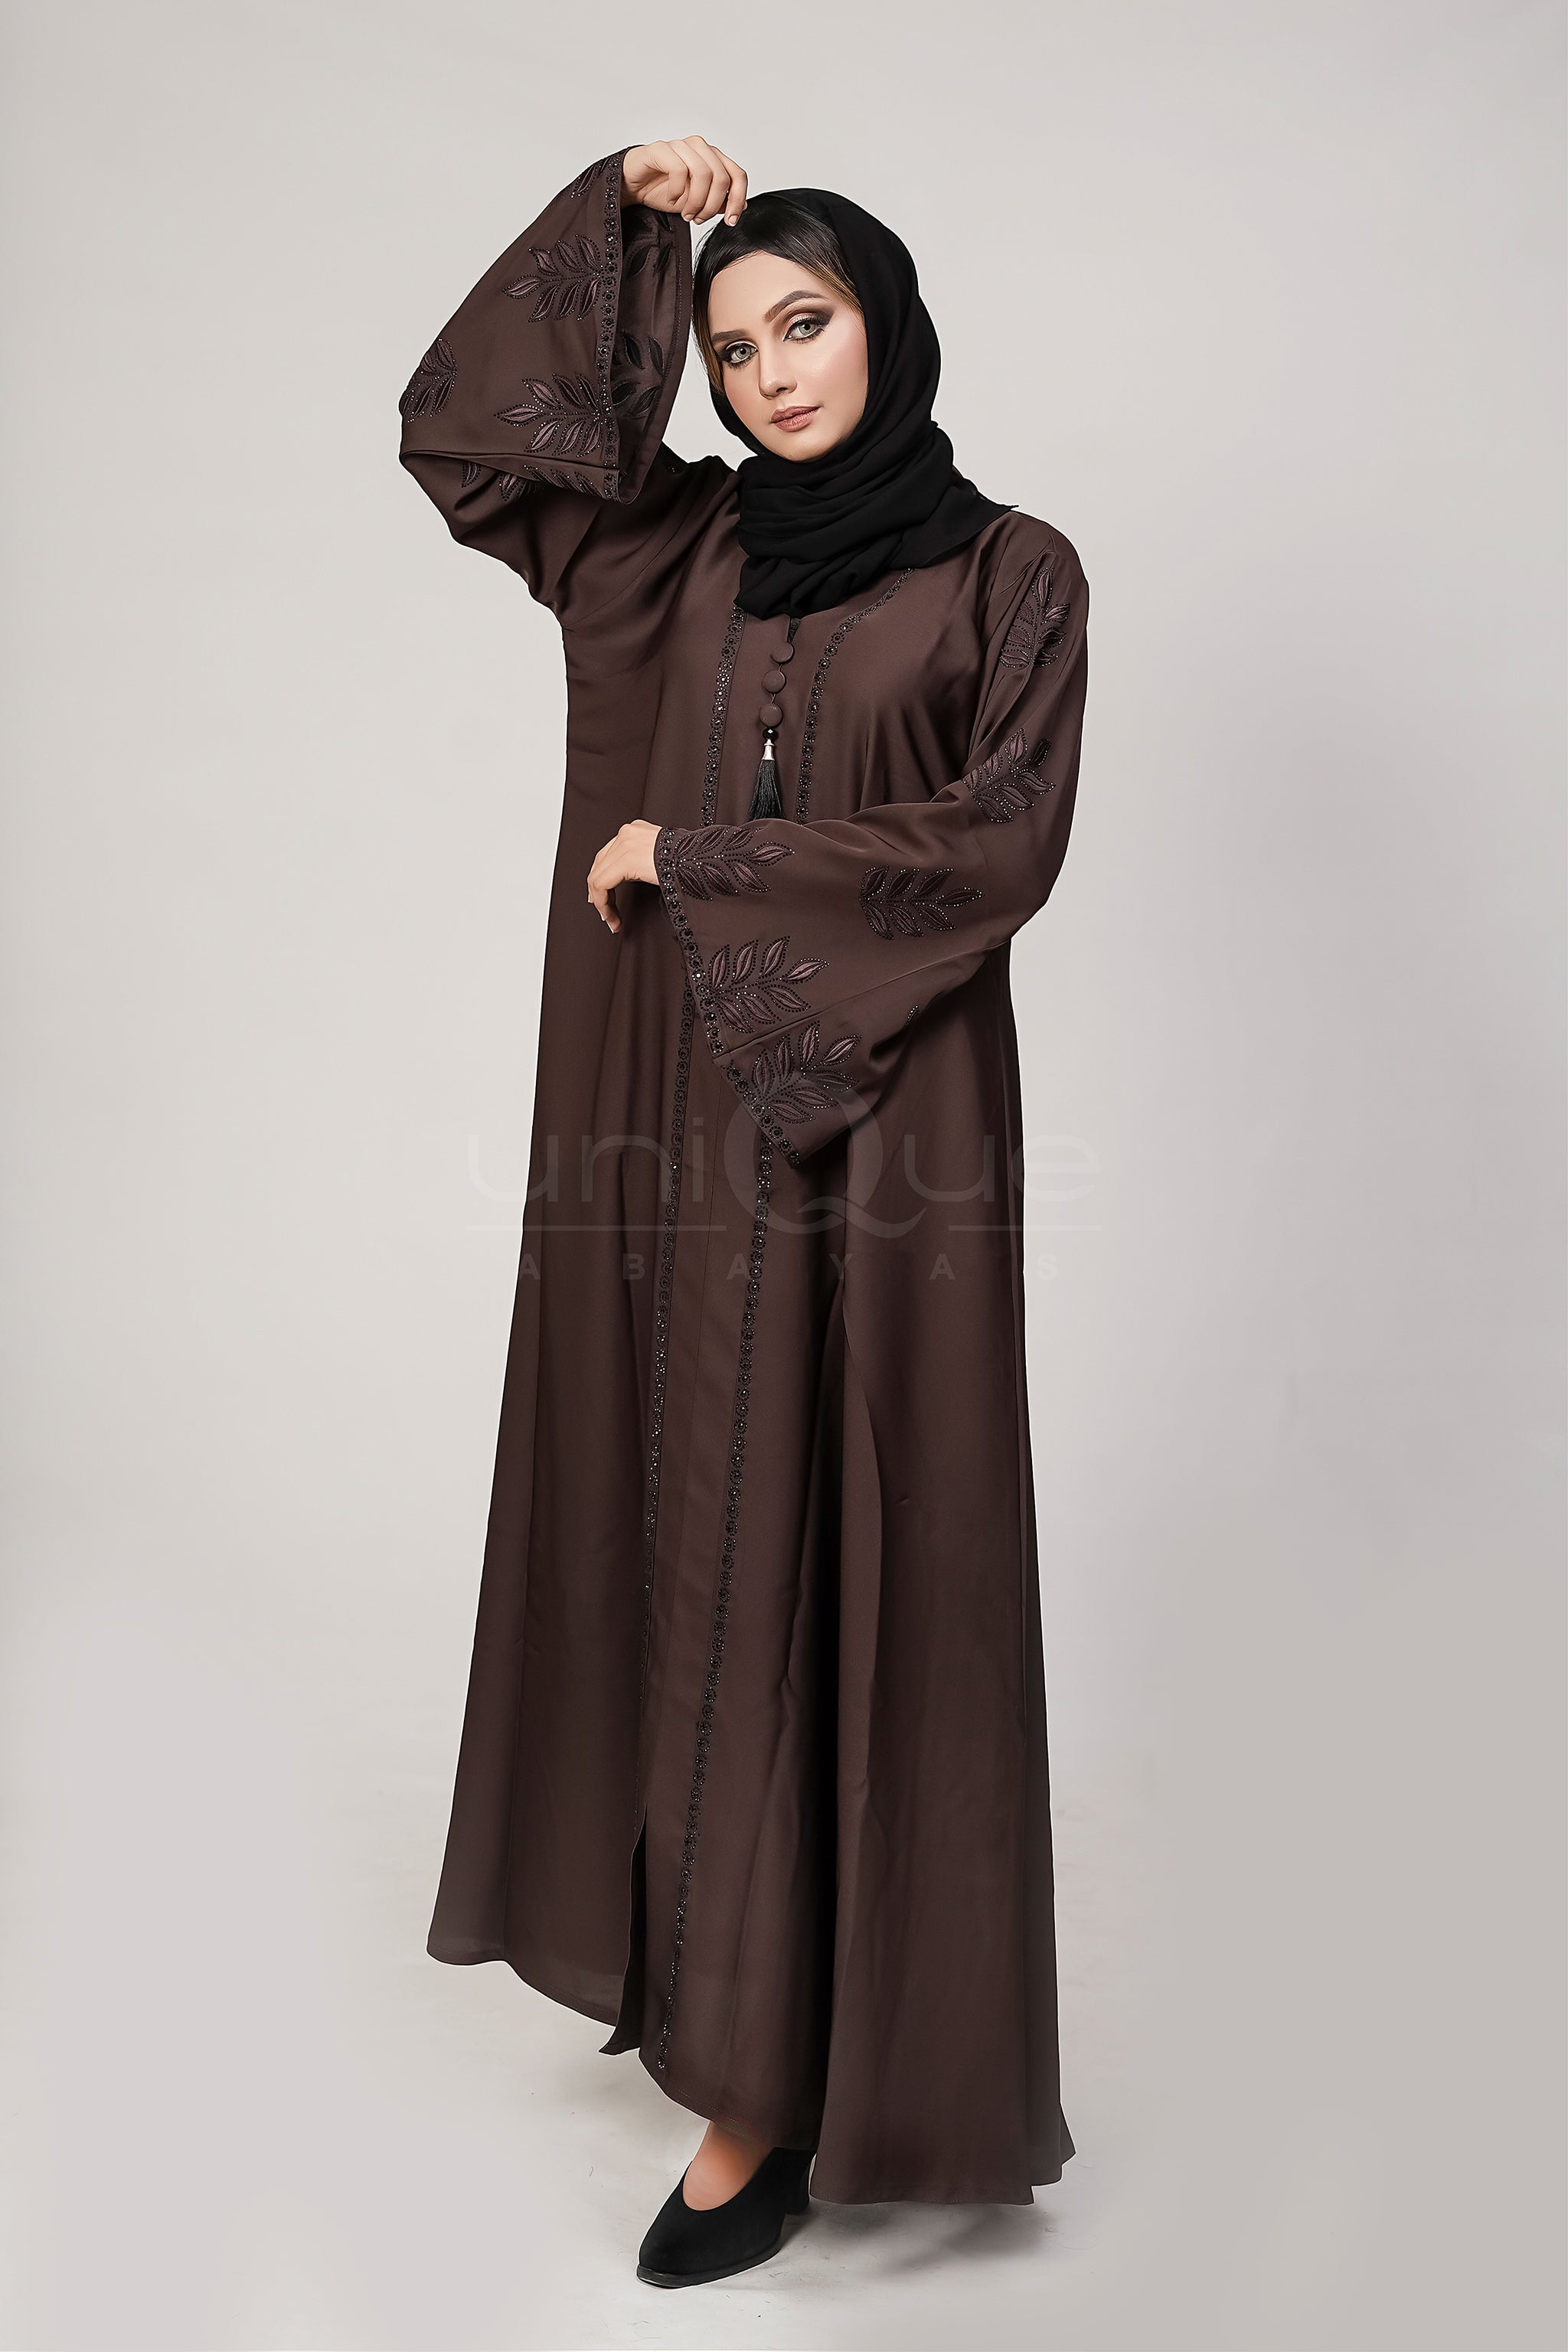 Embroidered Stone Chocolate Abaya by Uniquewallart Abaya for Women, Front Side View